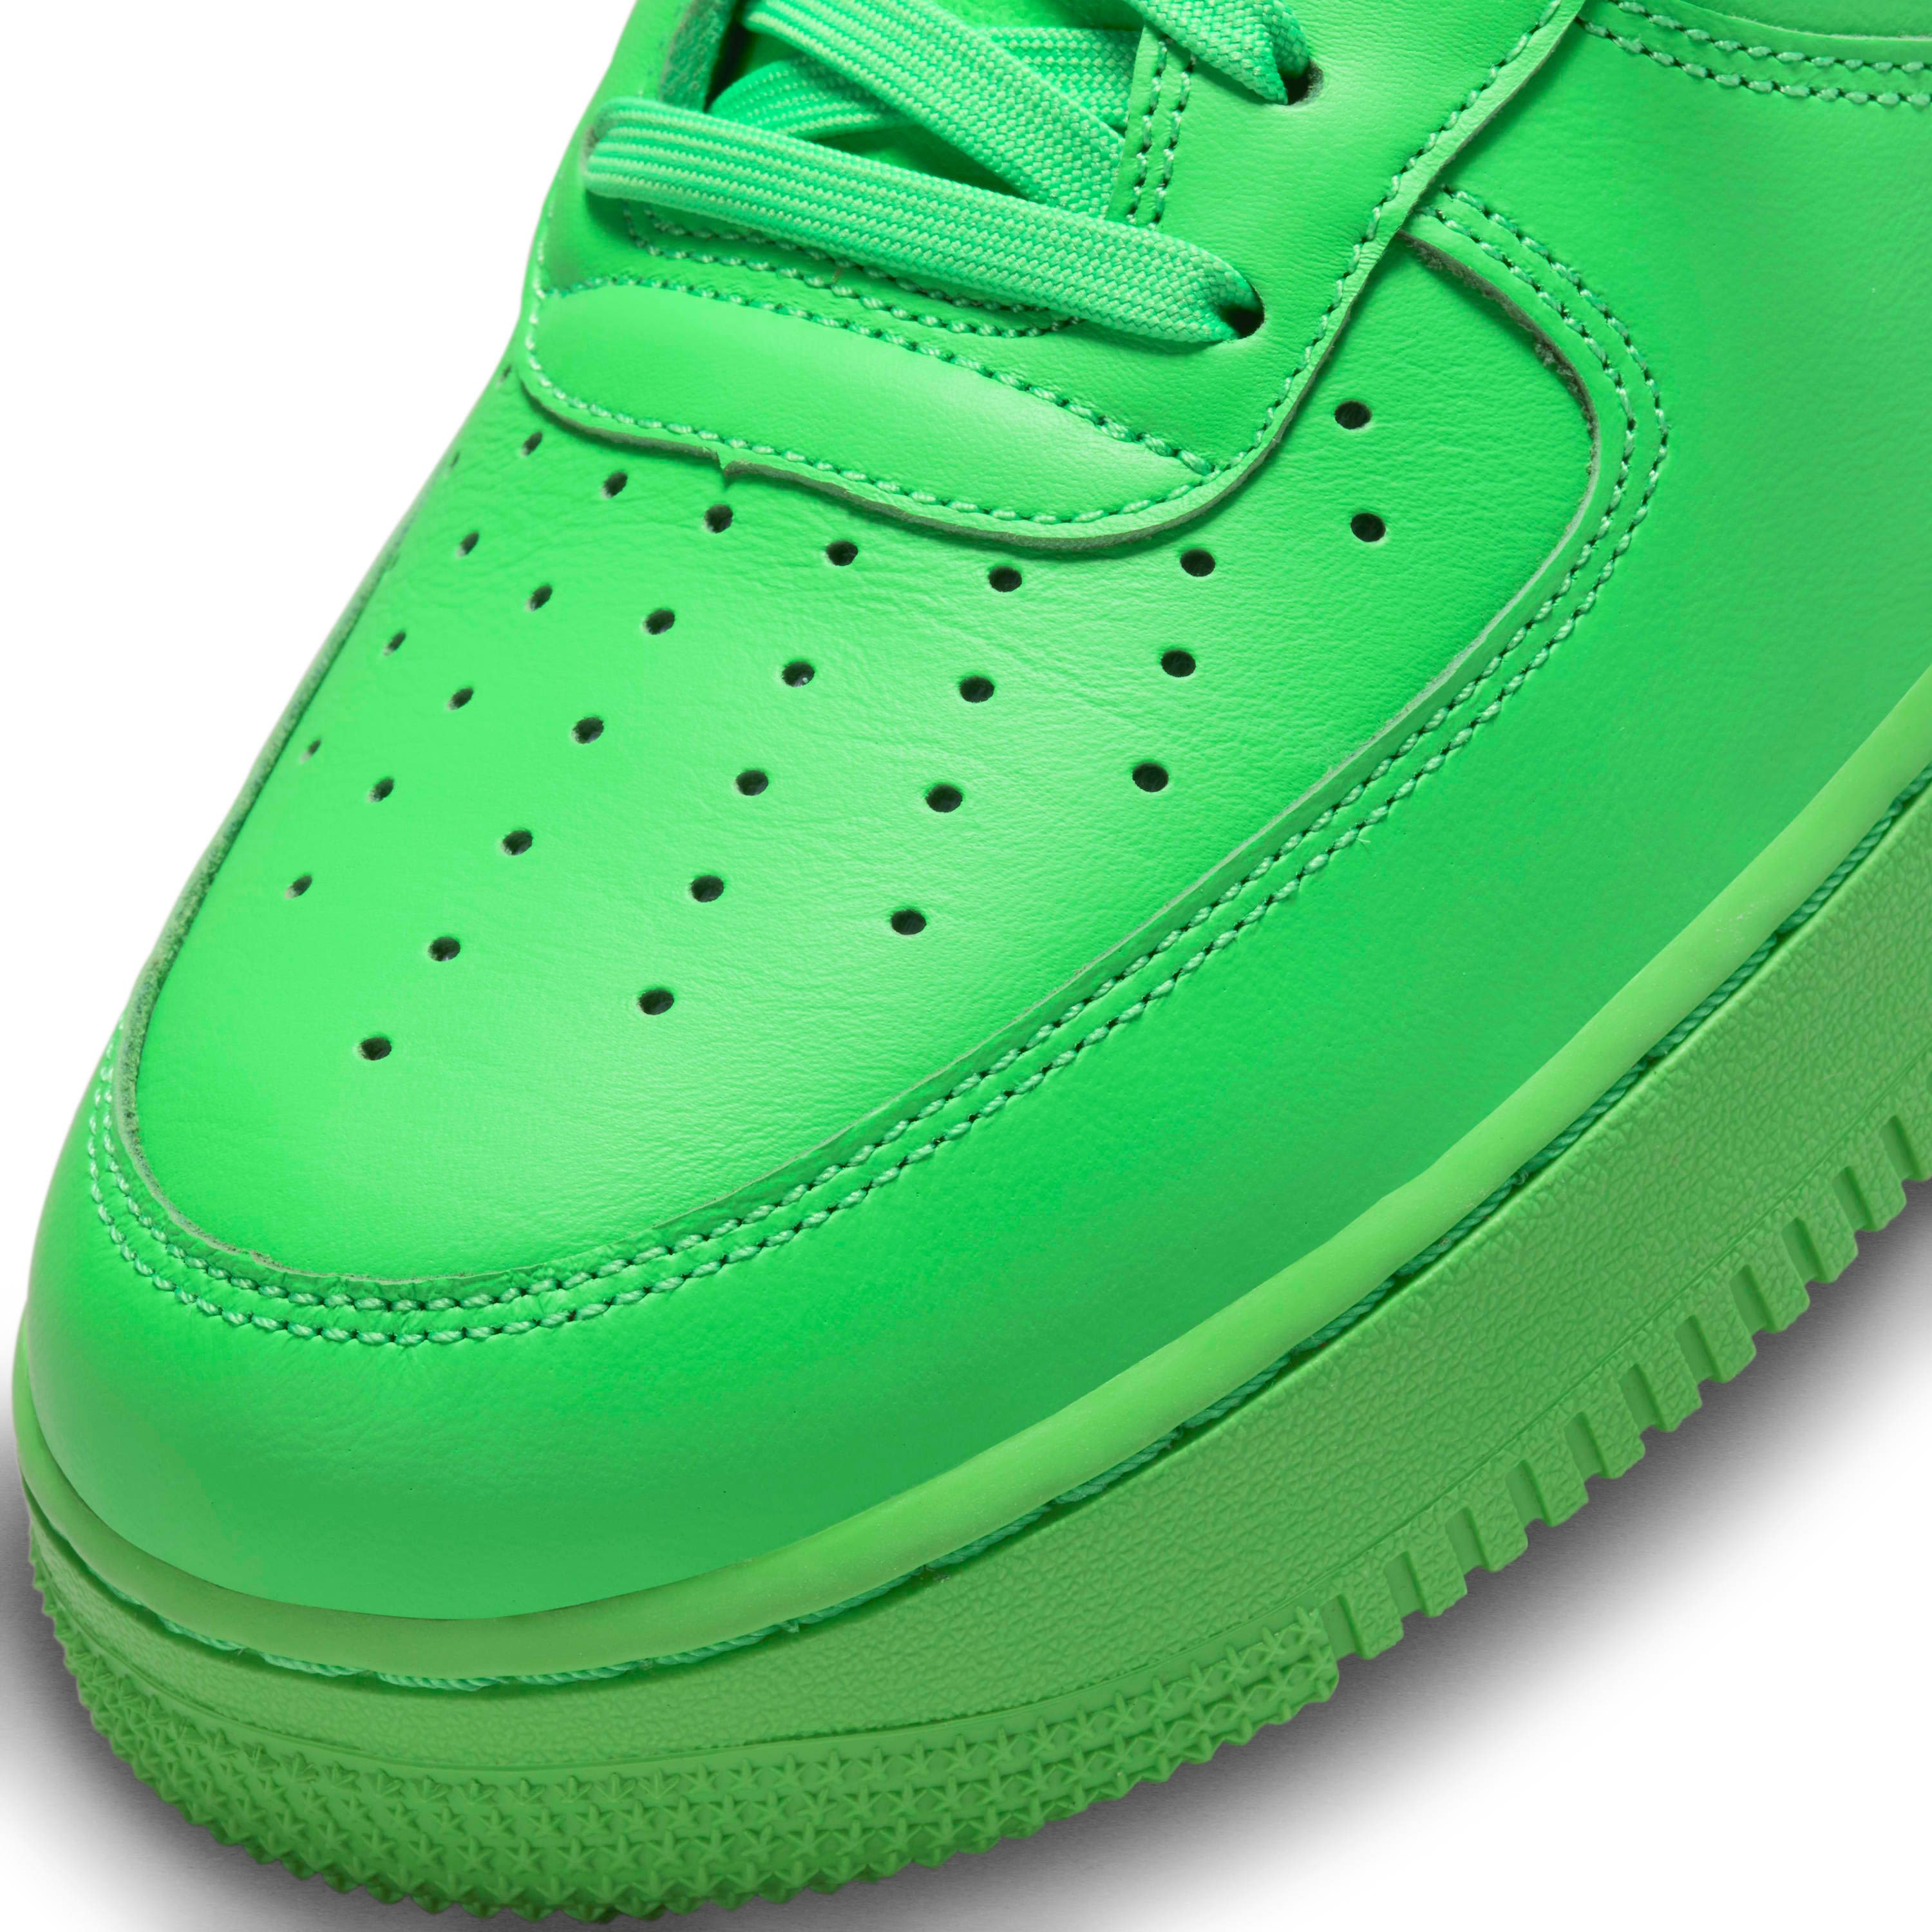 Nike Air Force 1 Low Off-White Spark Green Brooklyn Slime DX1419 300 Sz 14